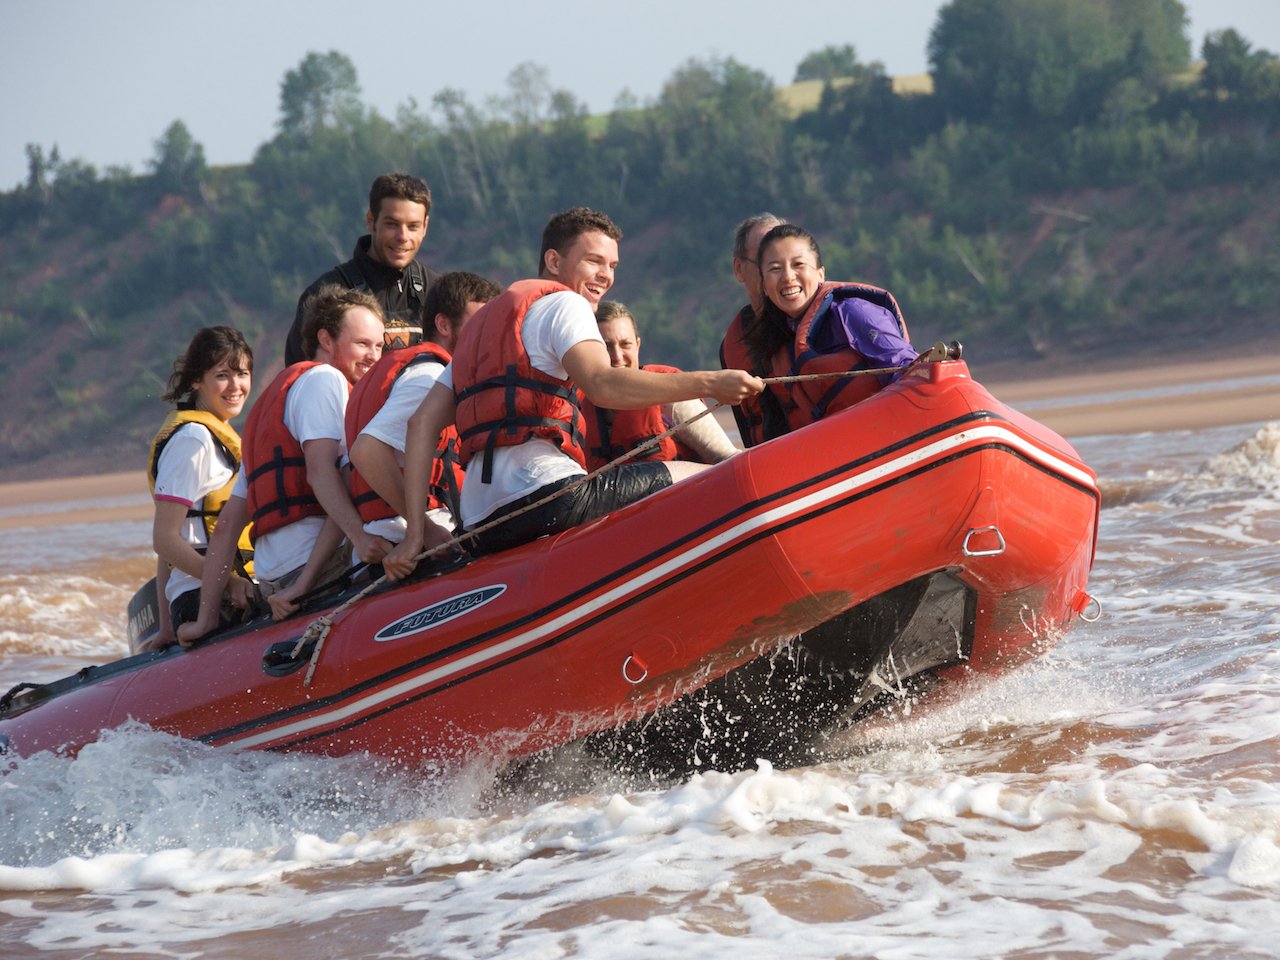 The adventures of Olympic Gold Medal speedskater Yang Yang of China as she is introduced to tidal bore rafting on the Shubenacadie River.